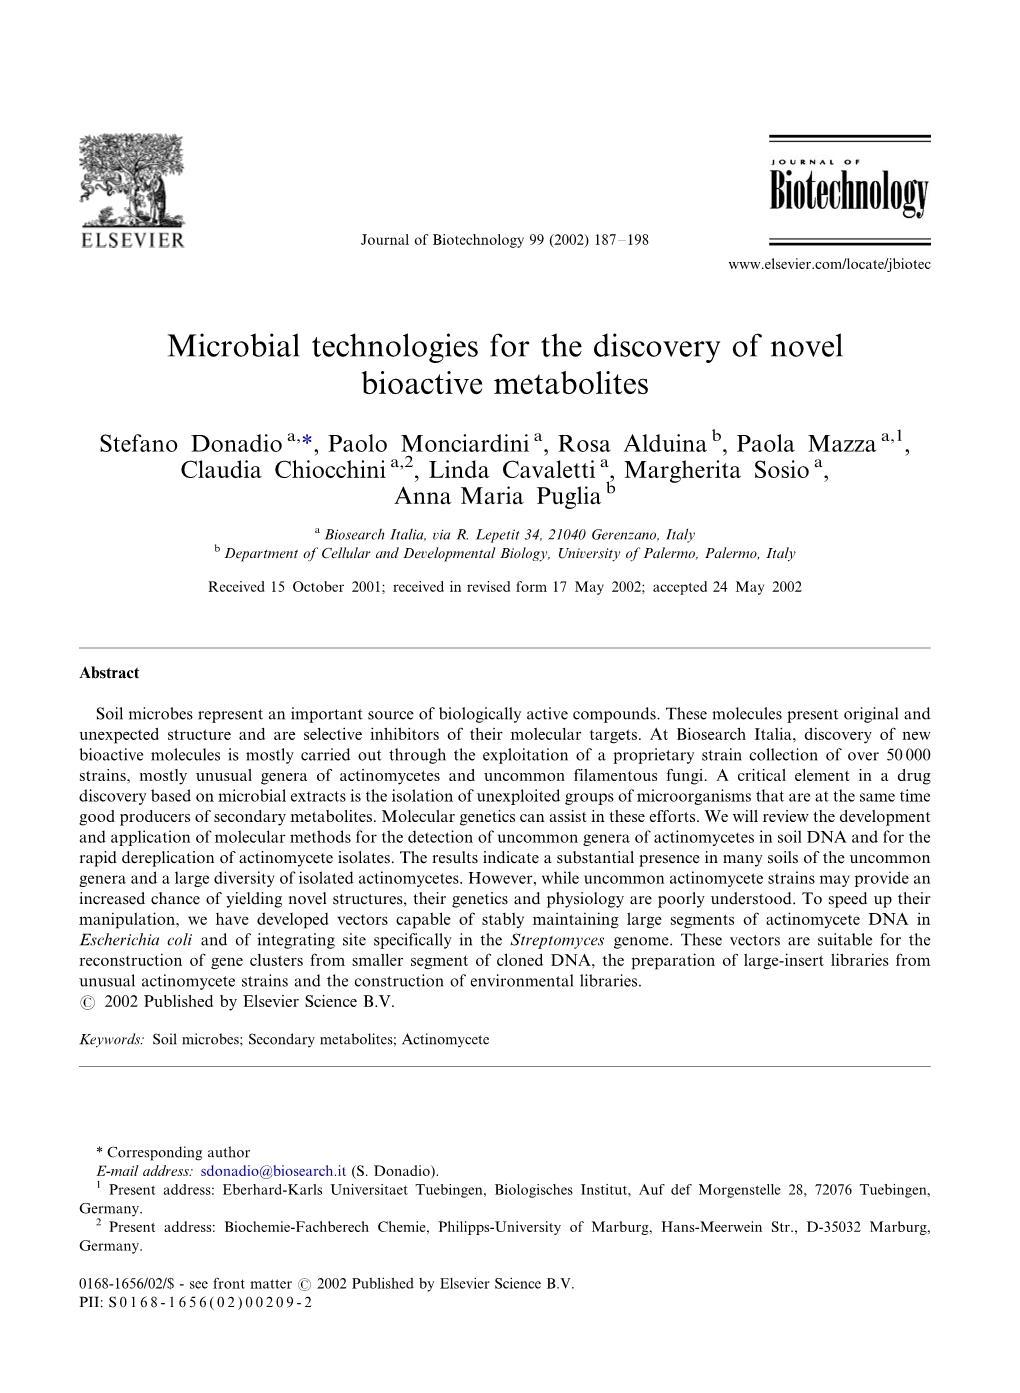 Microbial Technologies for the Discovery of Novel Bioactive Metabolites